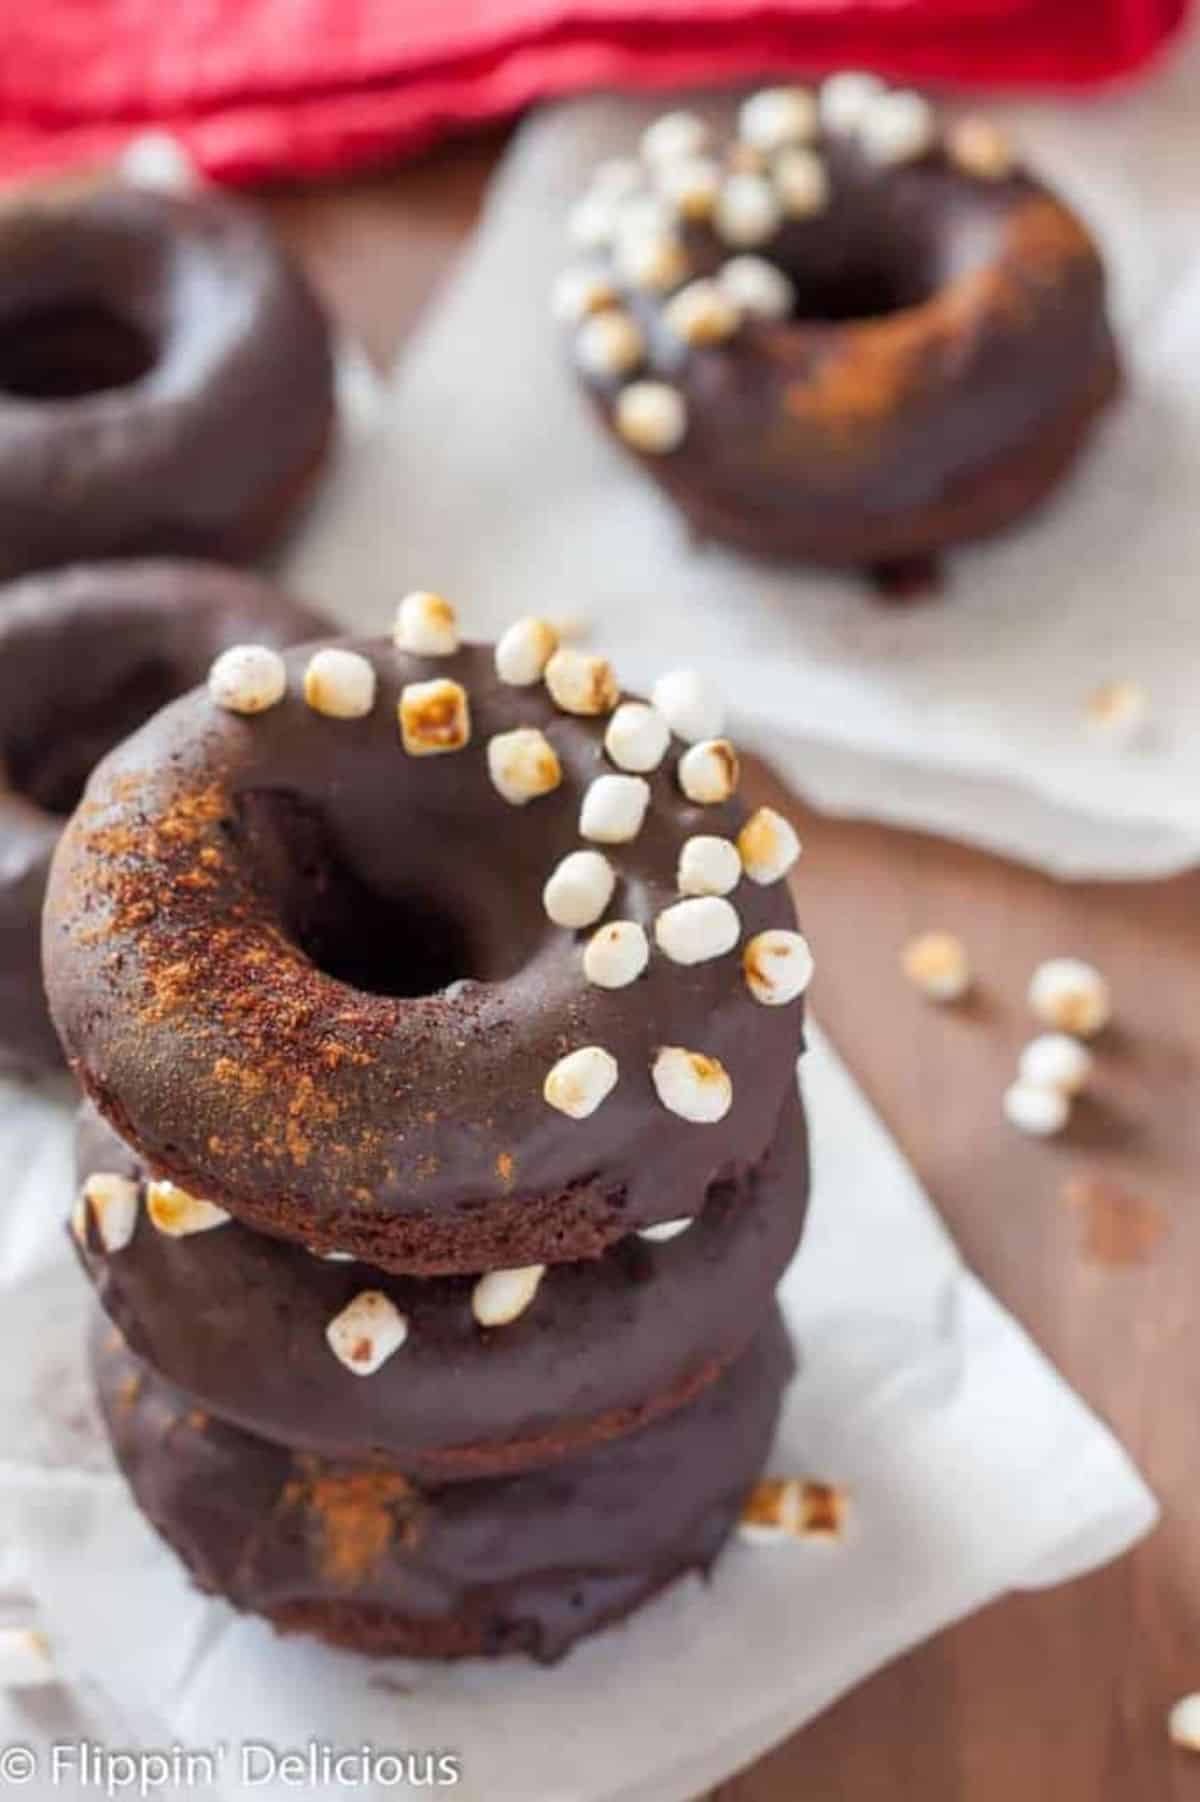 A pile of Gluten-Free Mexican Hot Chocolate Donuts on a table.